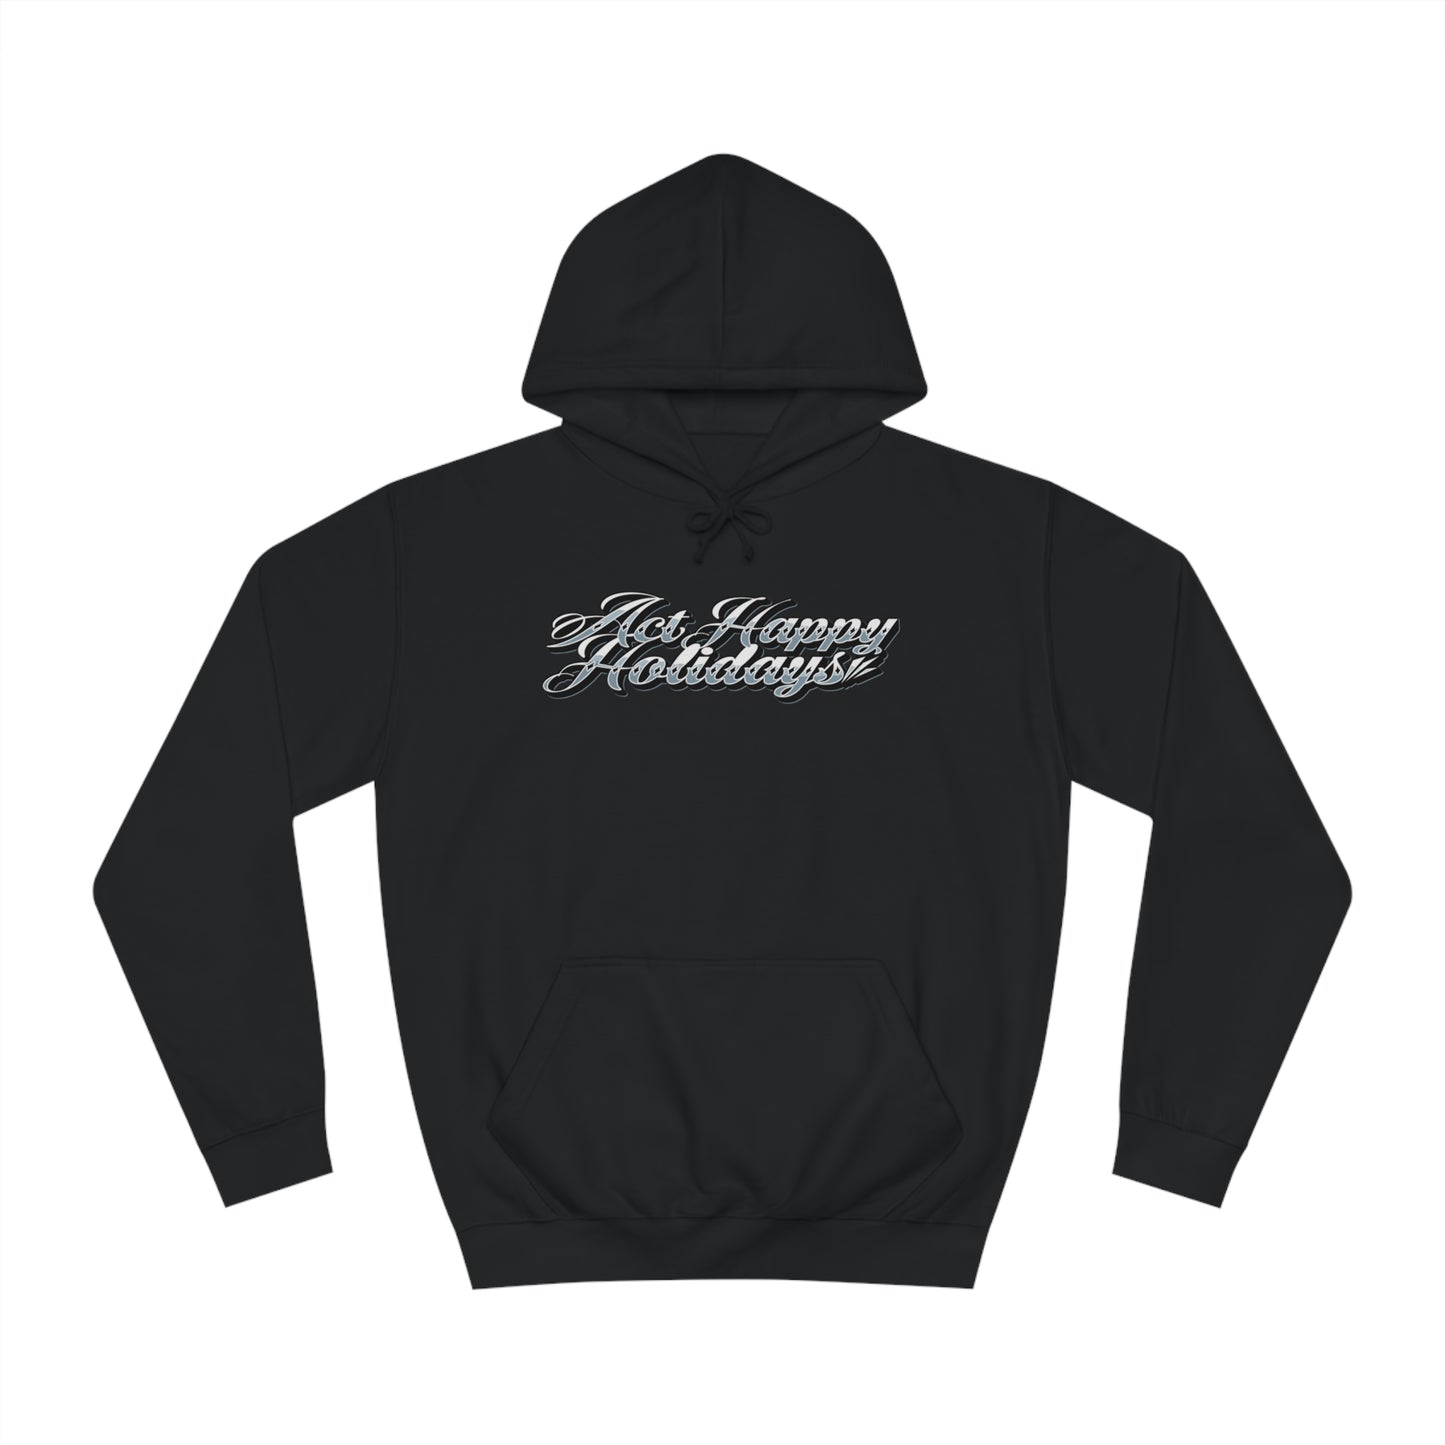 ActHappy Holidays Hoodie